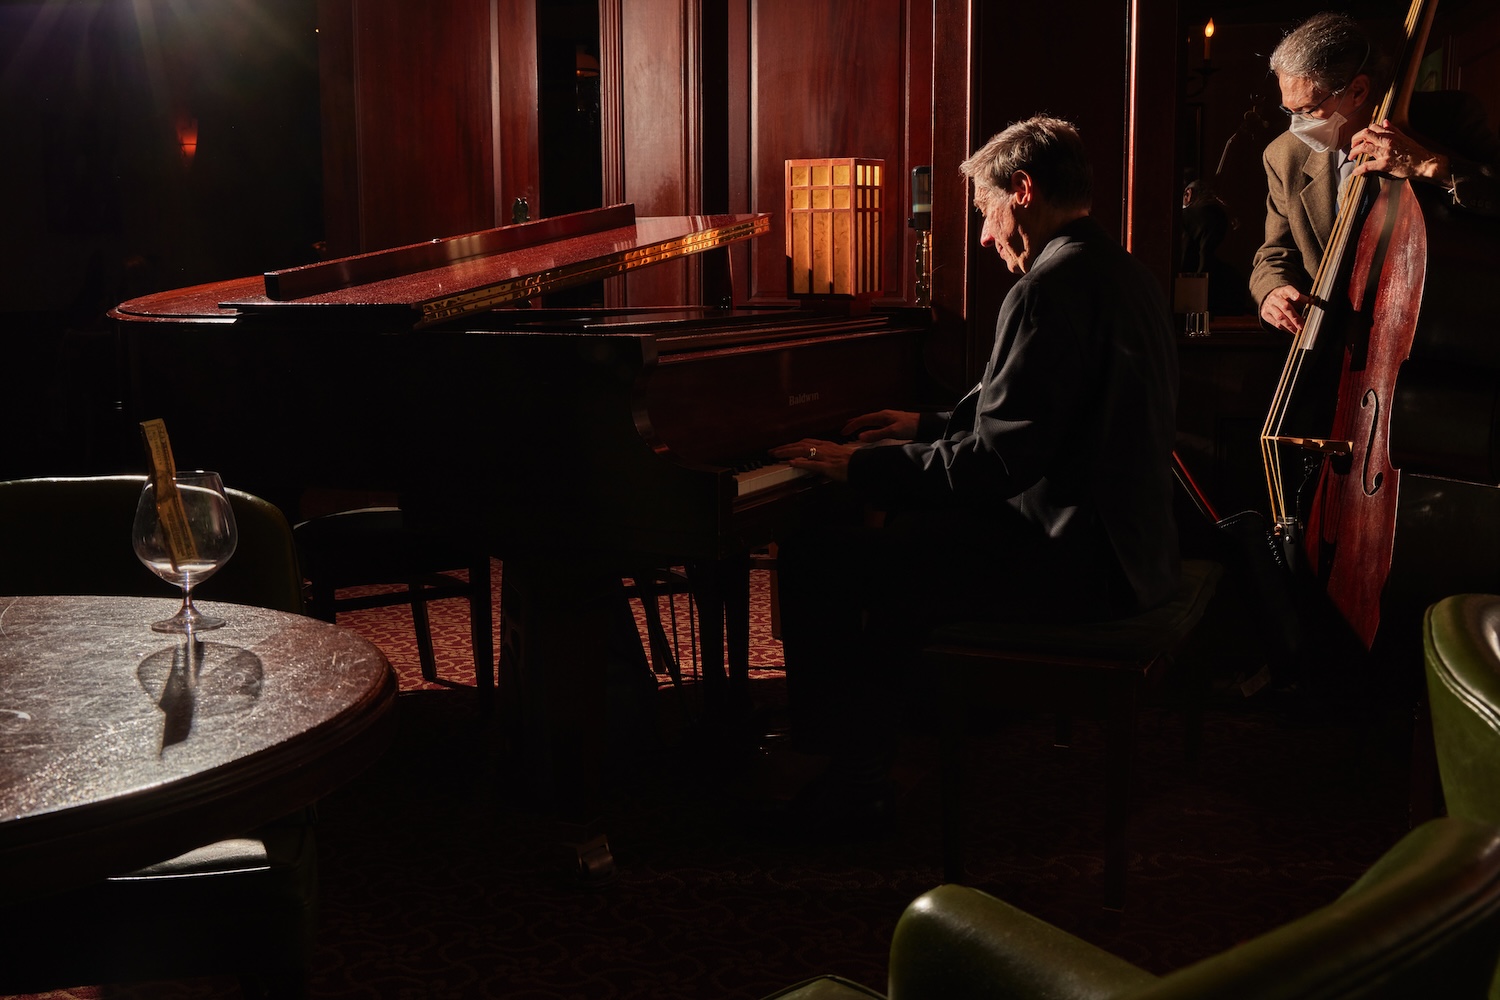 man playing piano in a suit in dim lit room